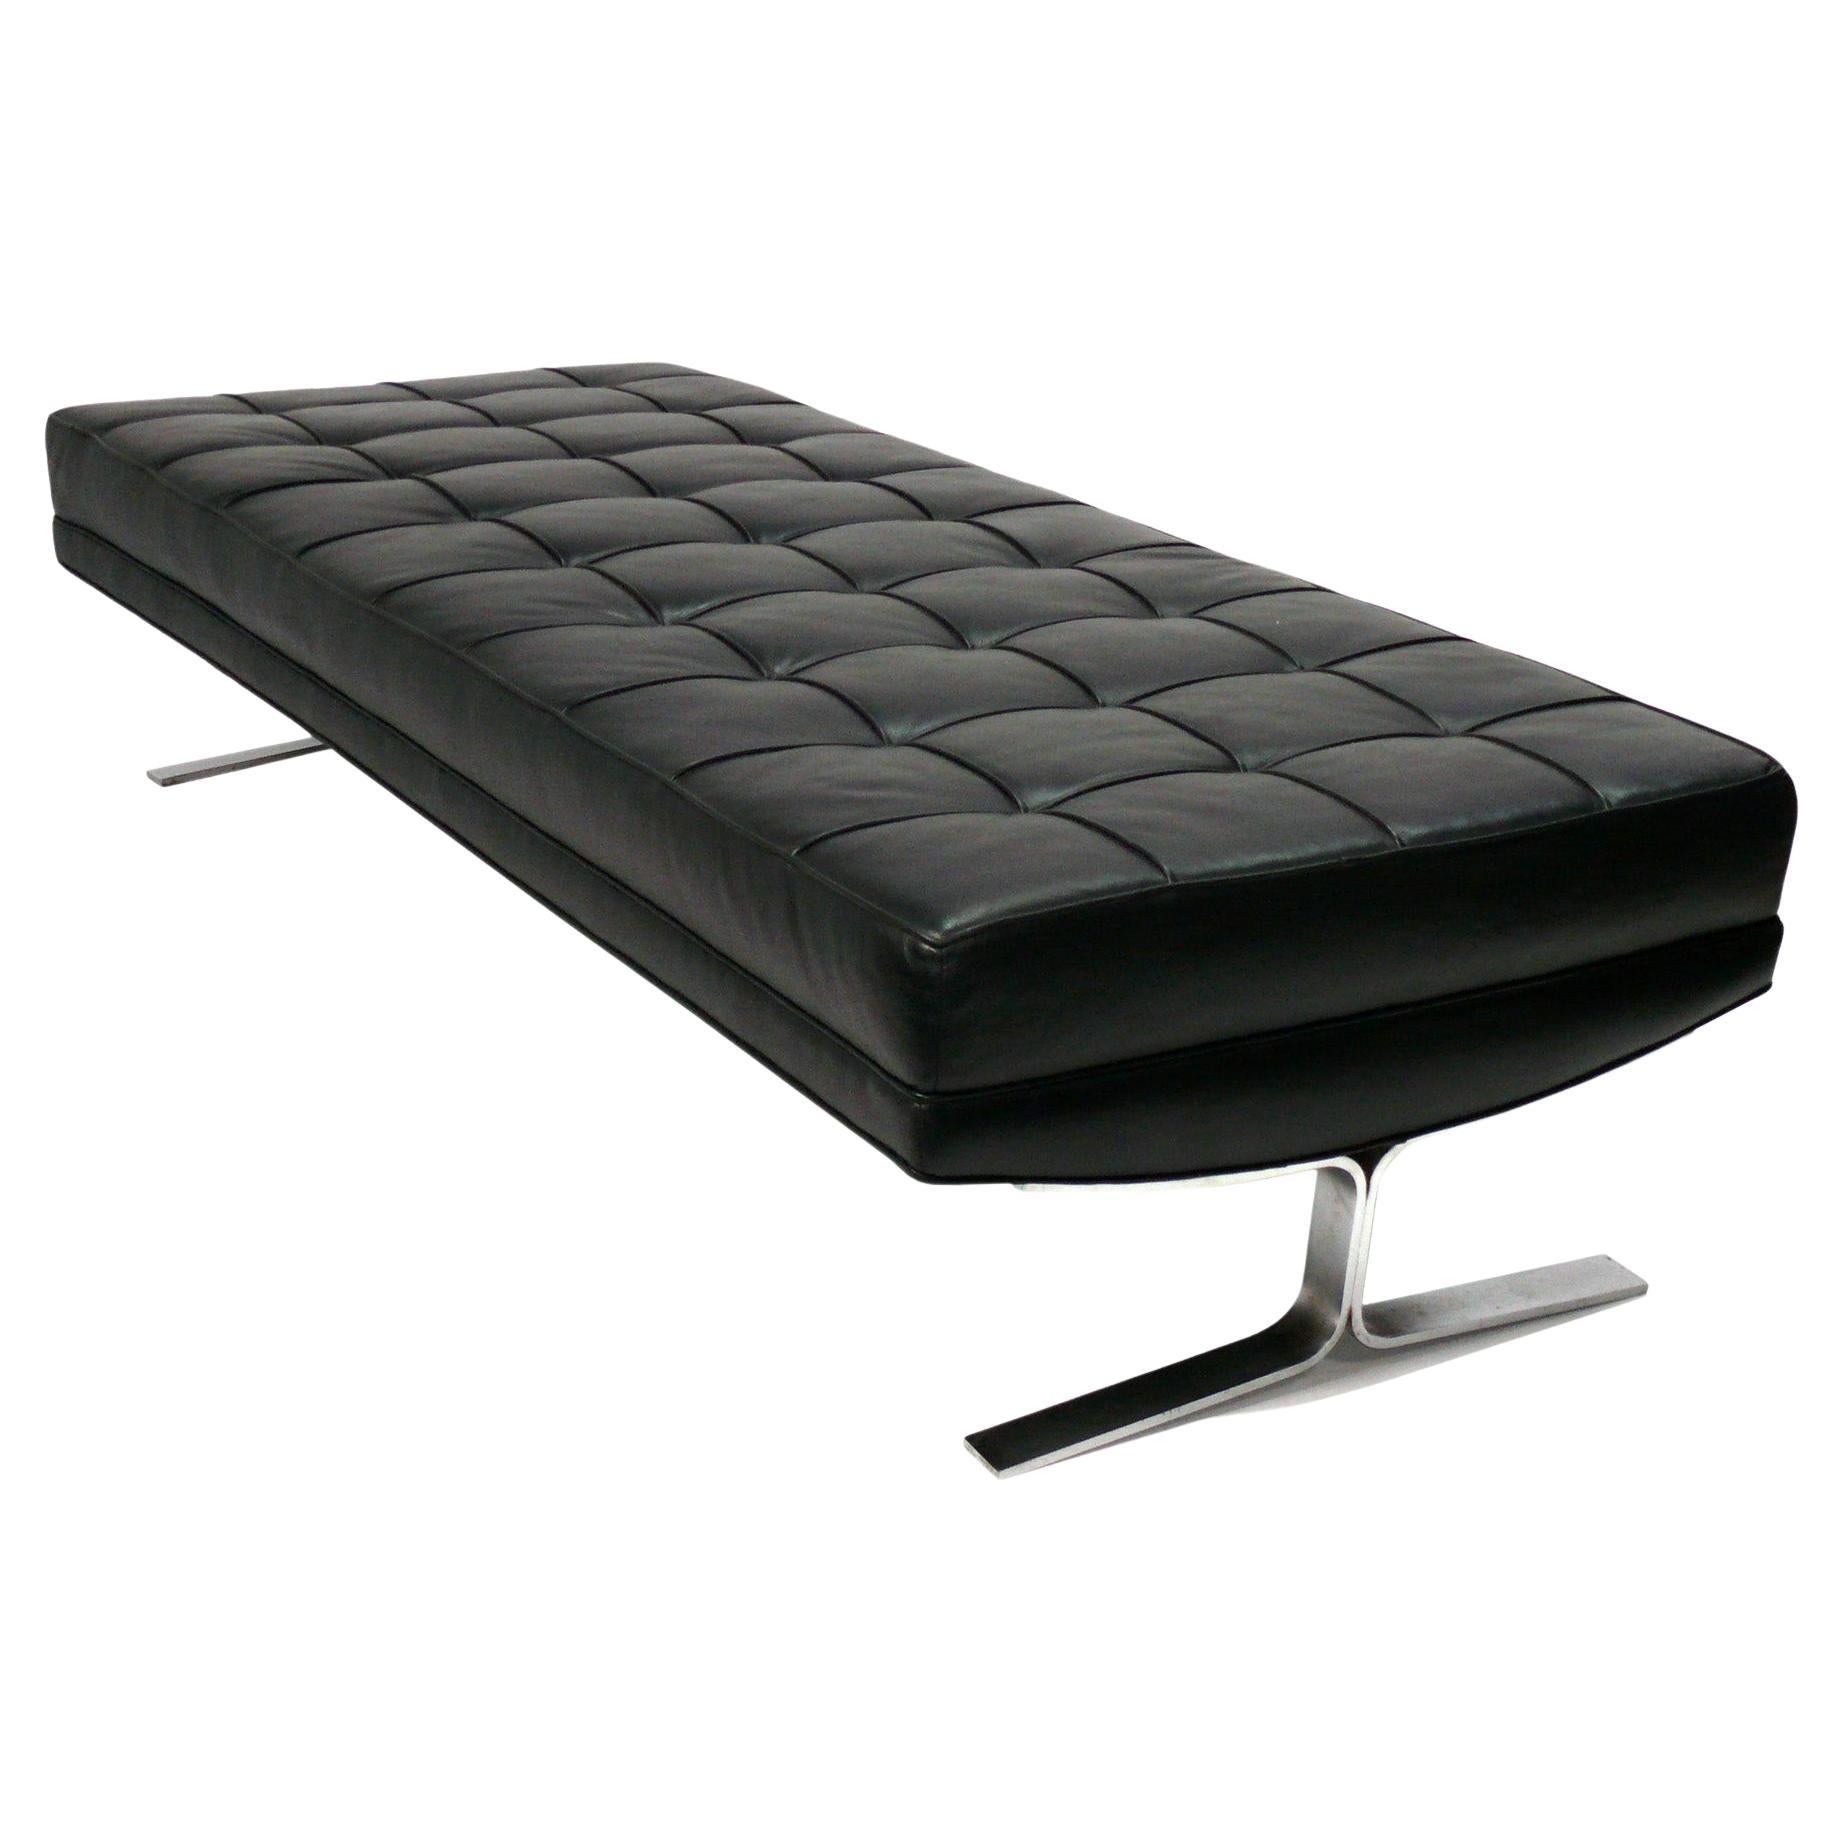 Tufted Black Leather and Satin Chrome Leg Bench attributed to Nicos Zographos